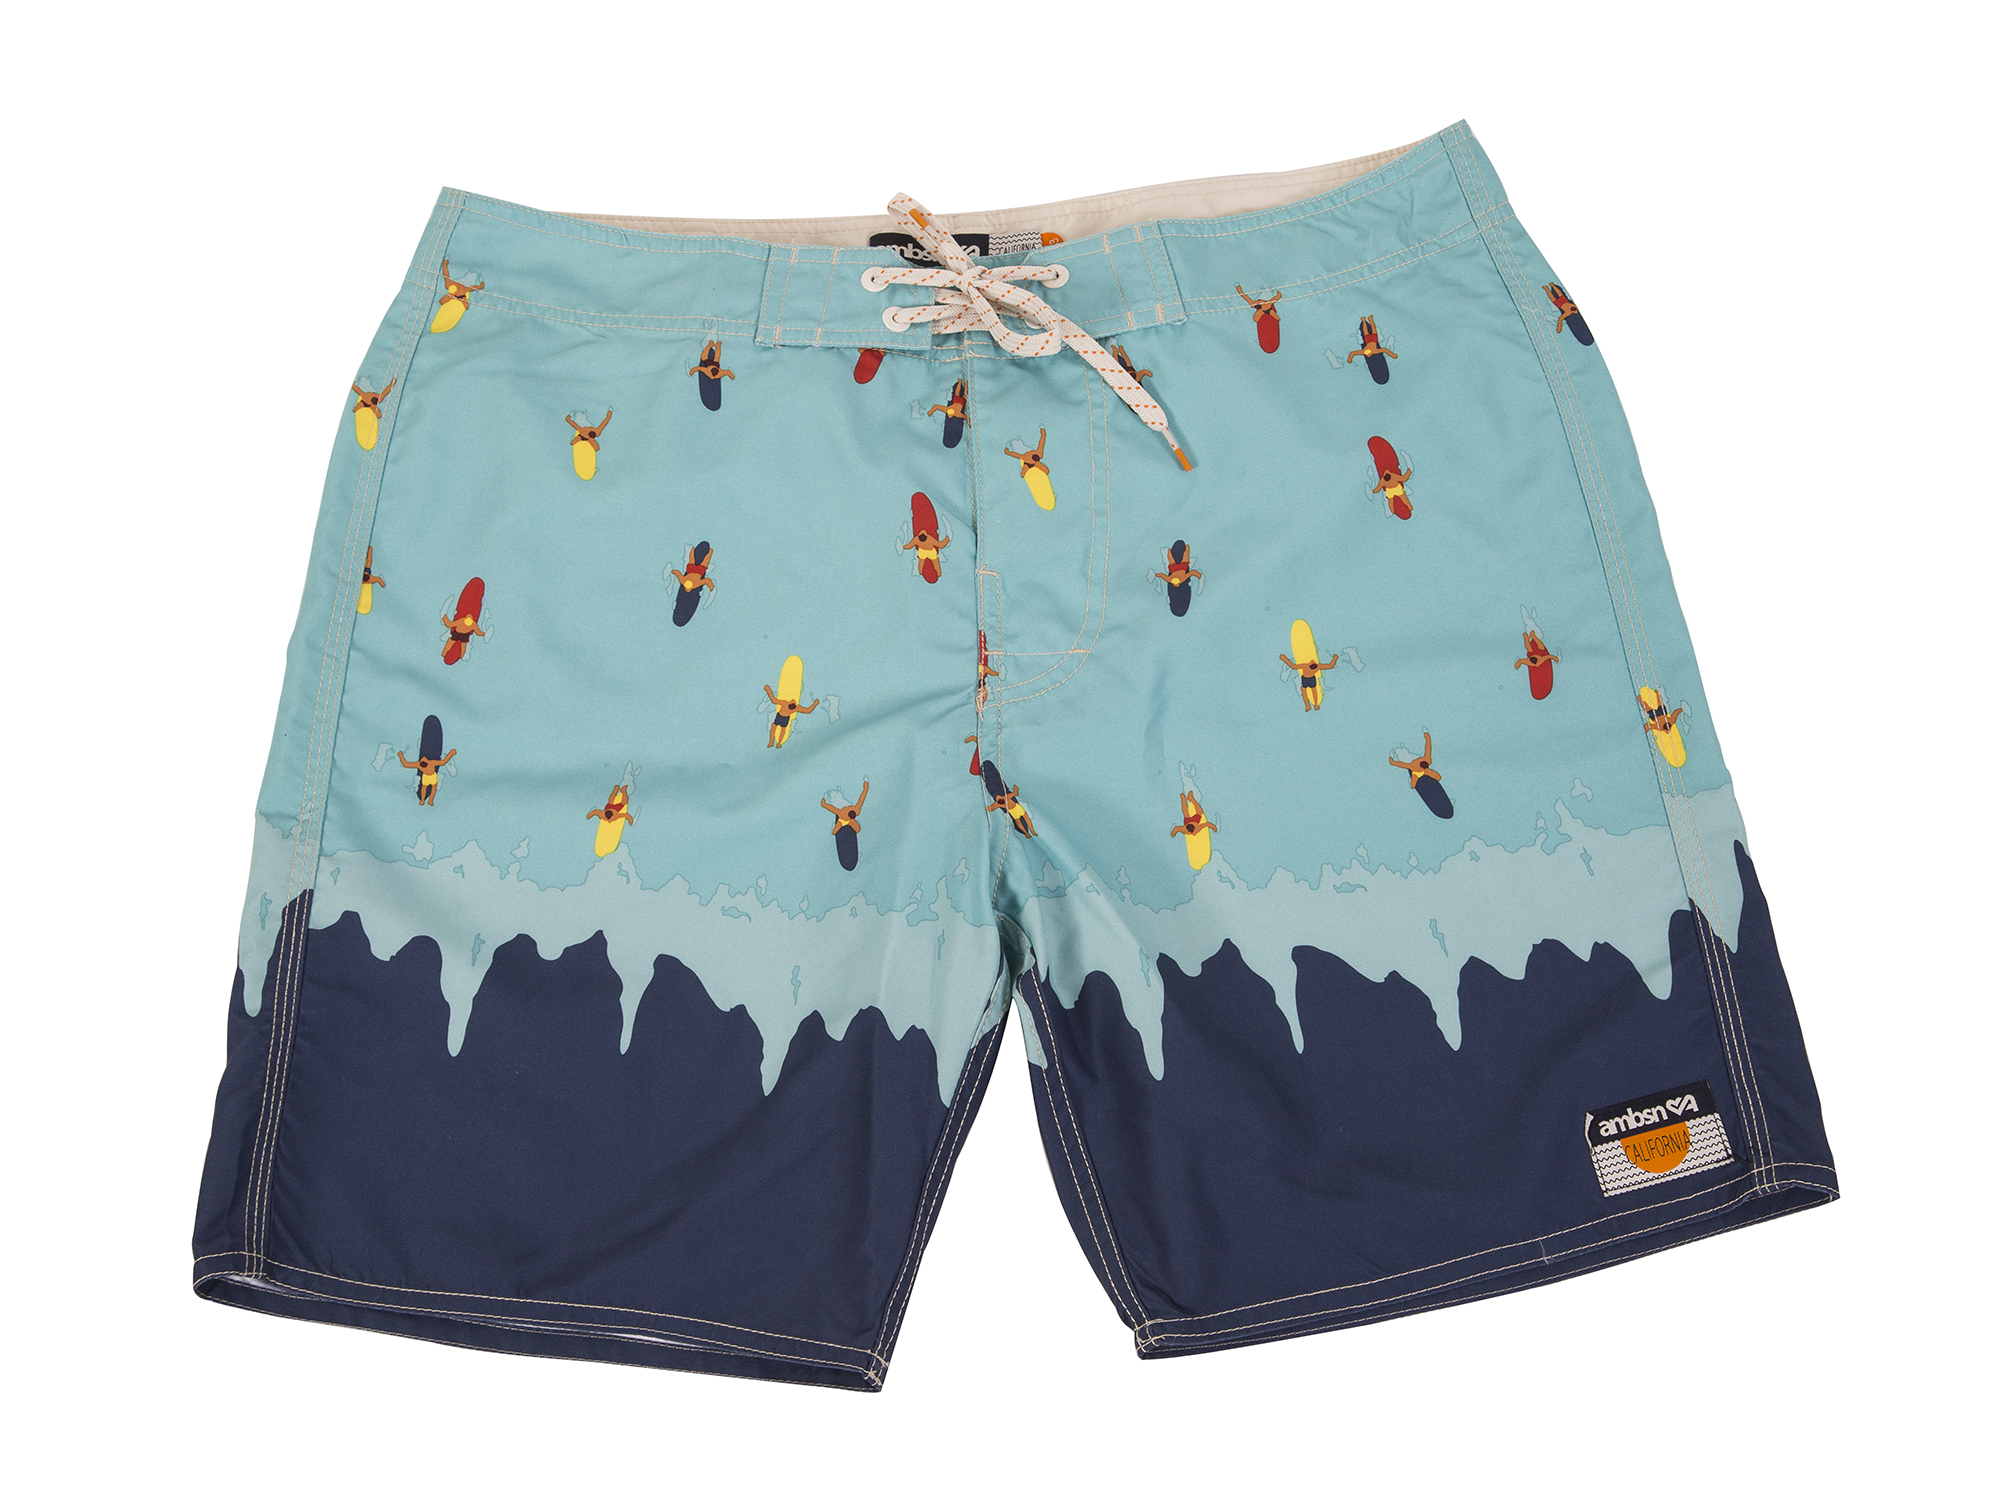 Ambsn &quot;Whipeout&quot; boardshort in navy, $60 at Hooley